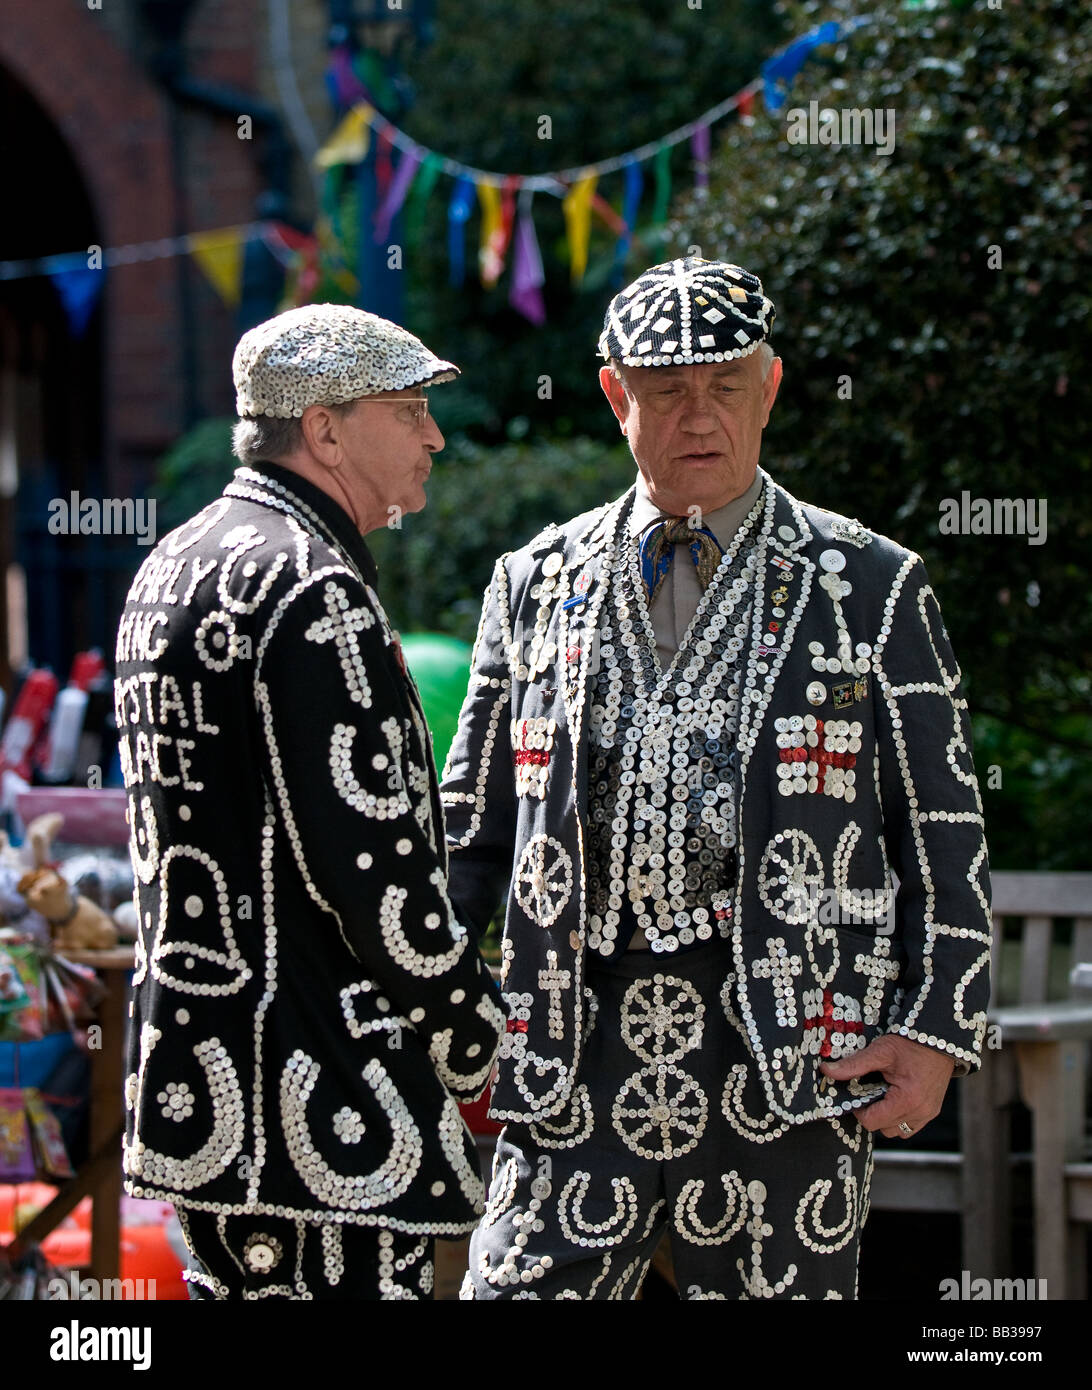 The Pearly King of Highgate in conversation with the Pearly King of Crystal Palace in London.  Photo by Gordon Scammell Stock Photo